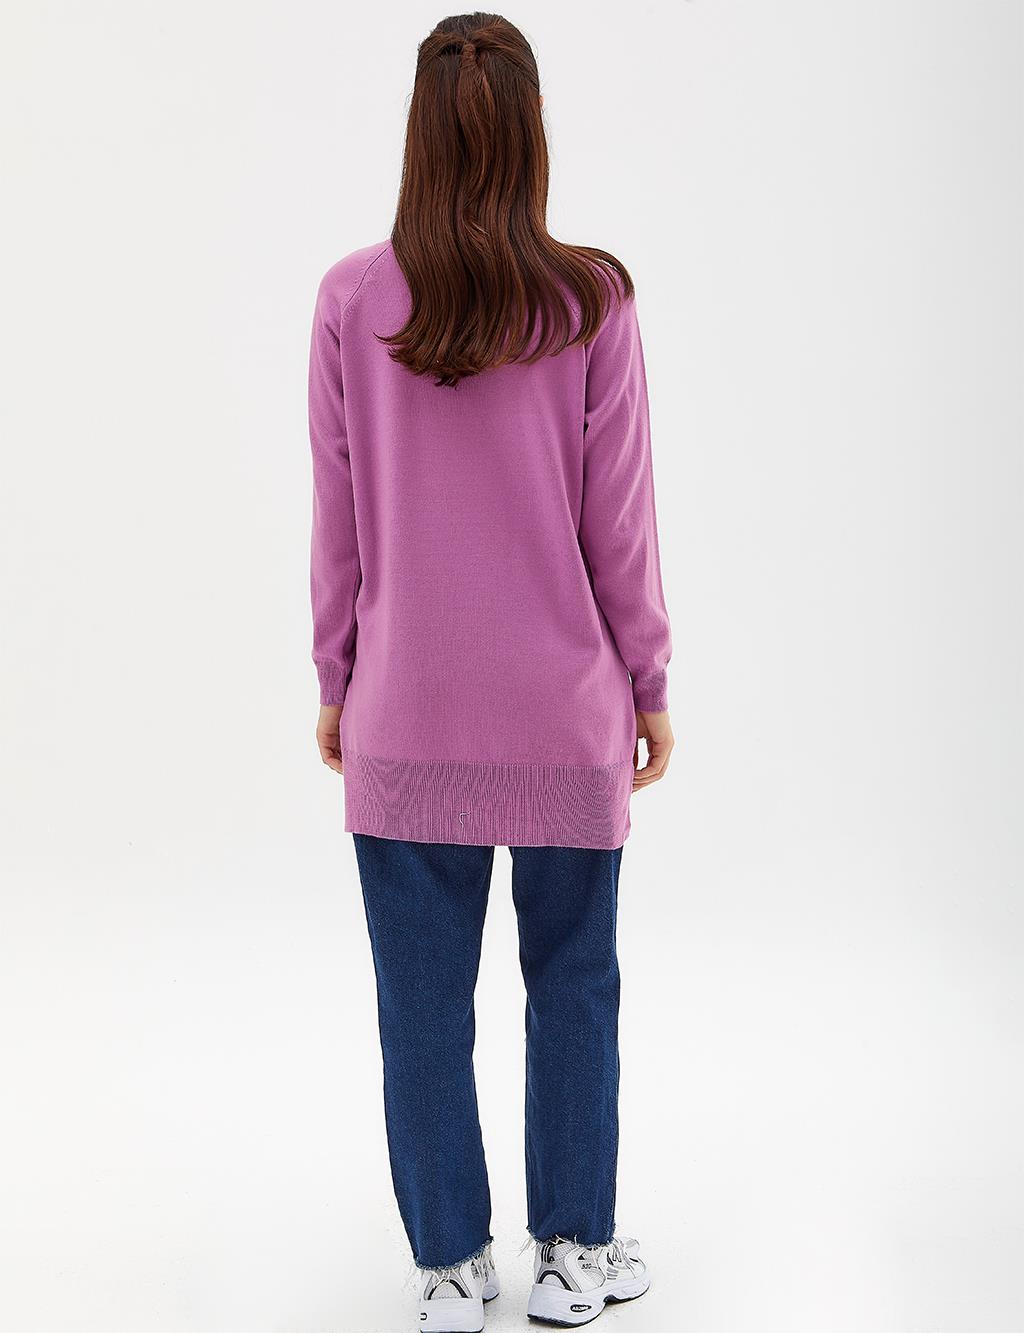 Fisherman's Neck Knit Blouse in Lilac